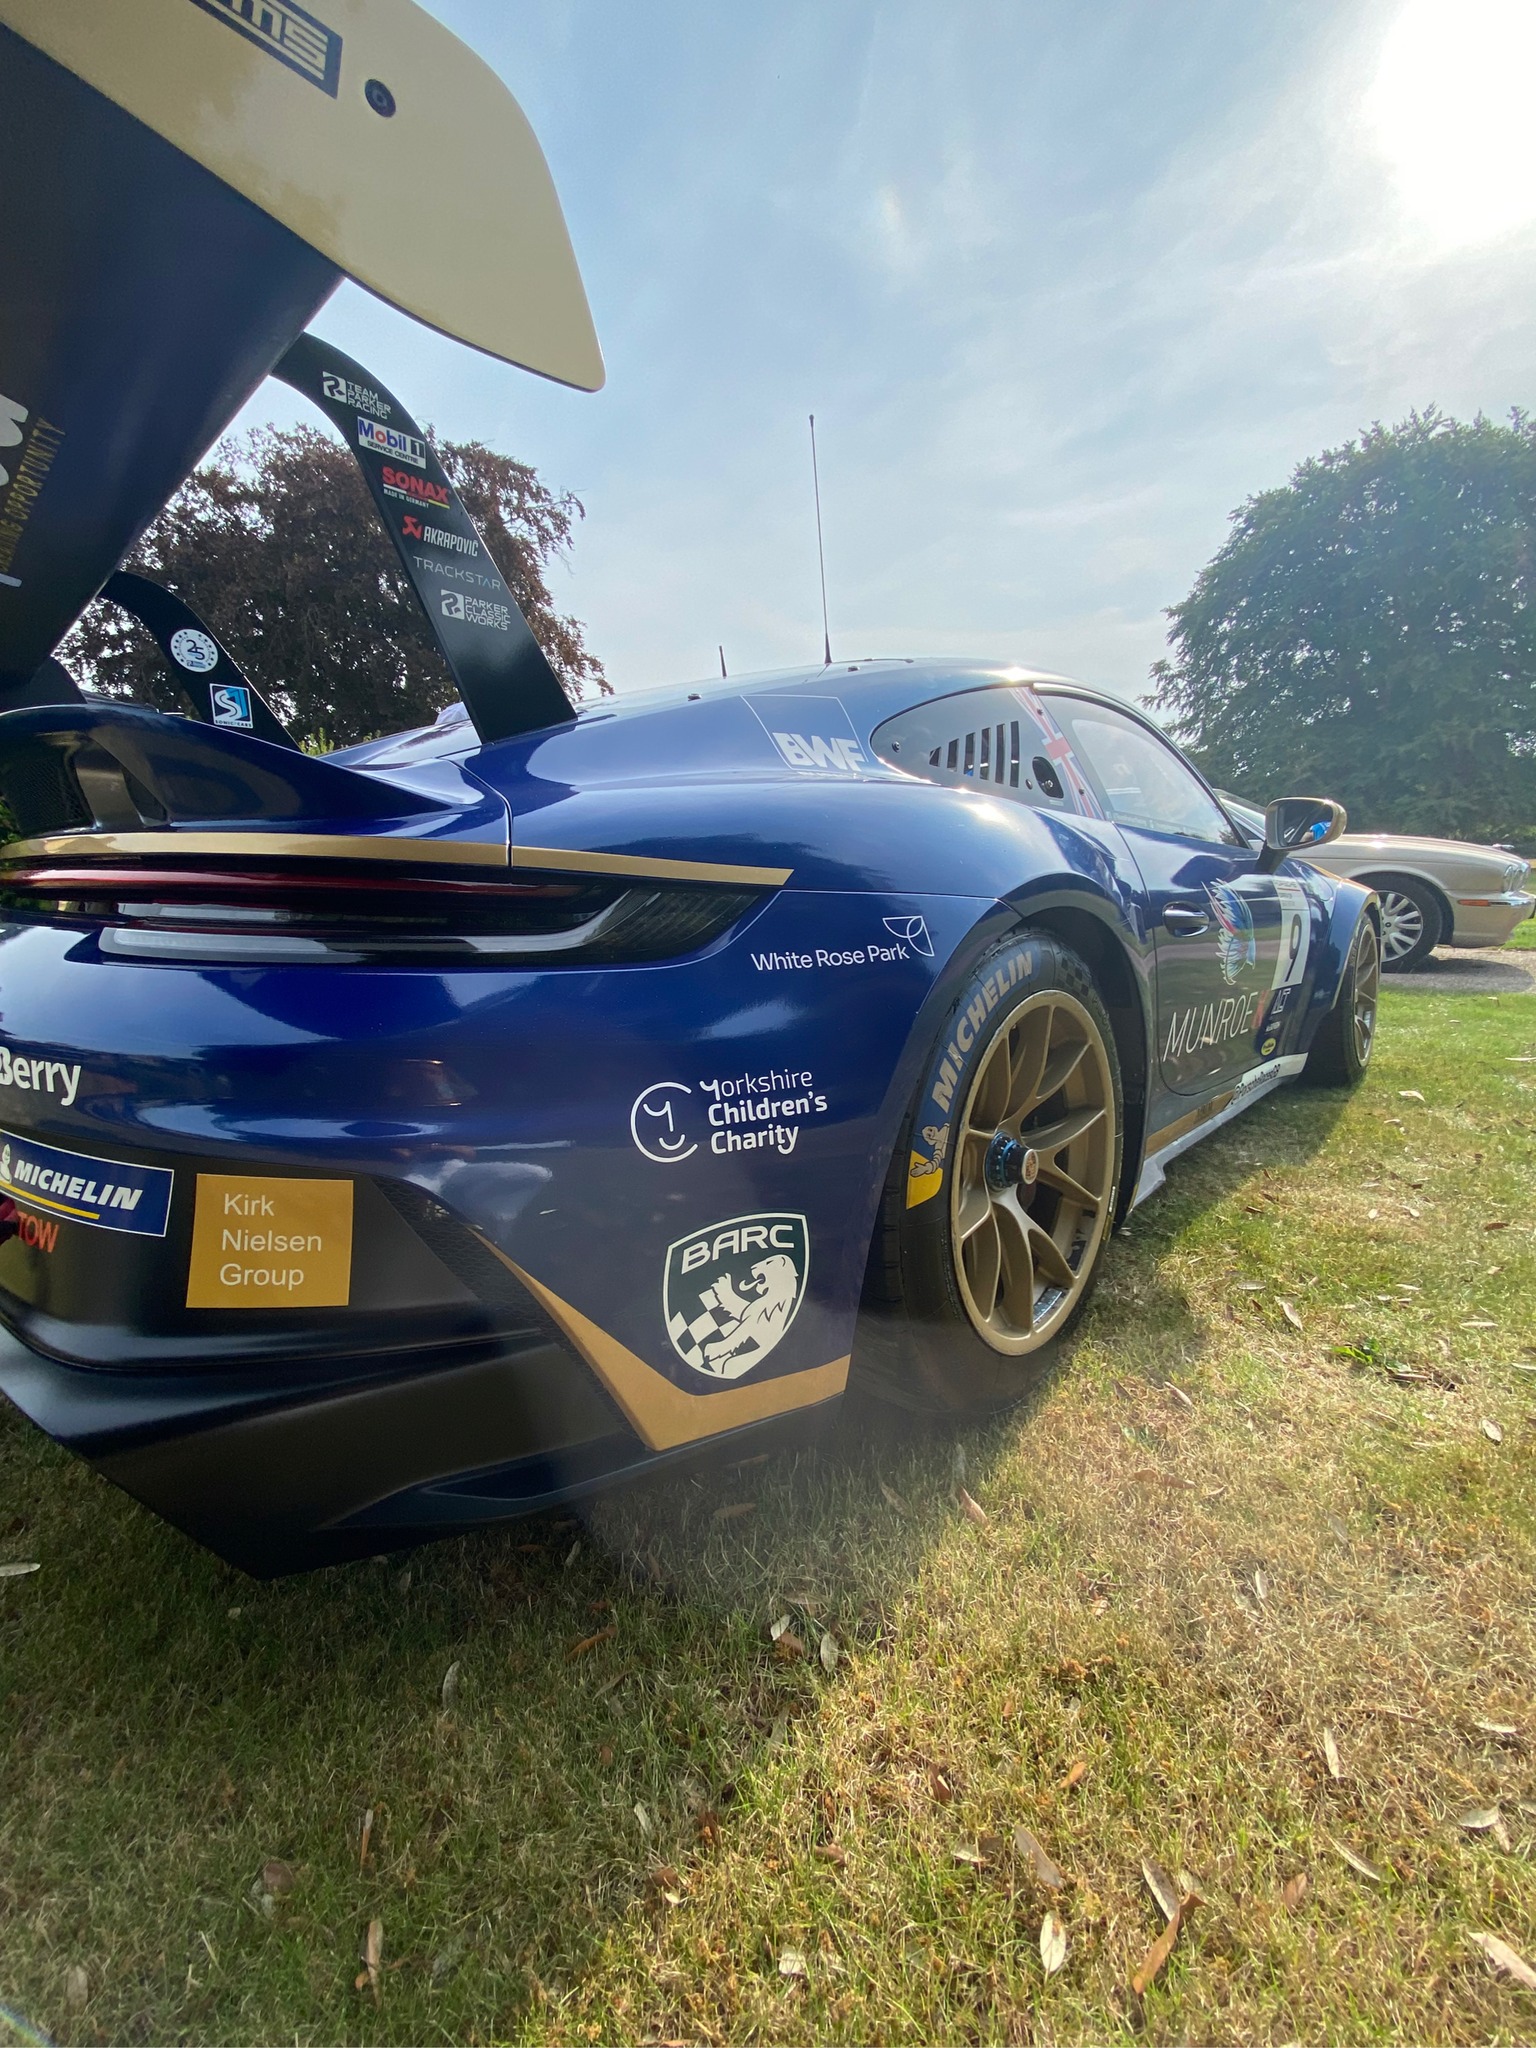 PORSCHE RACER WILL ASPIN TO SUPPORT YORKSHIRE CHILDRENS CHARITY